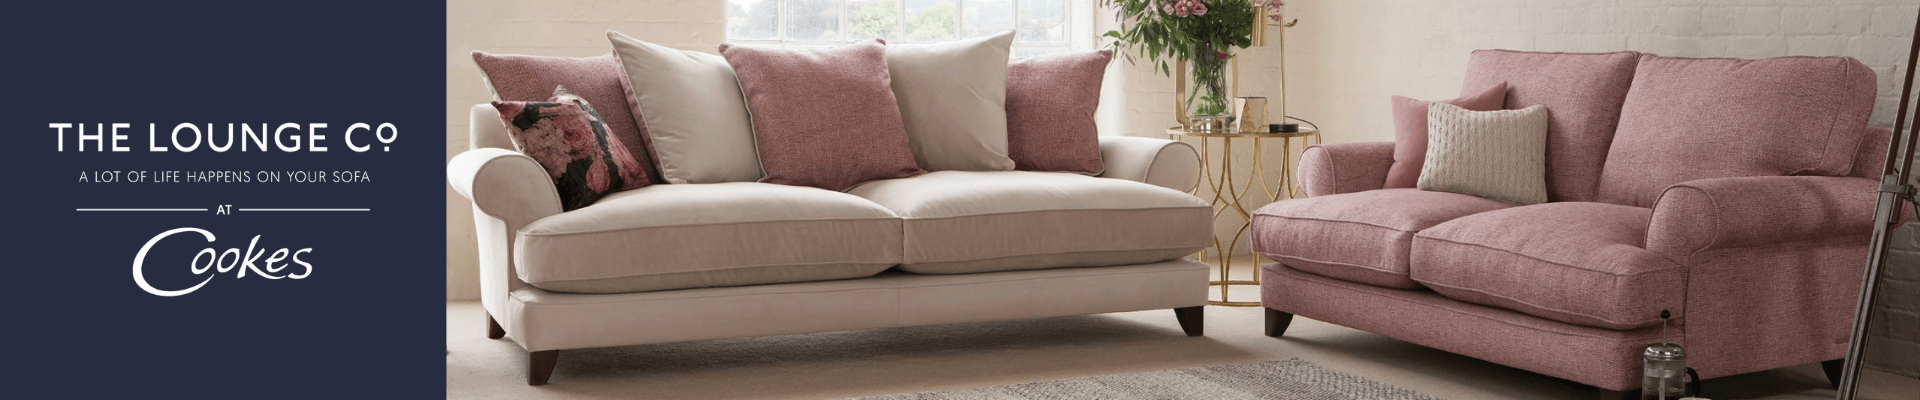 The Lounge Co Sofas Collections Banner